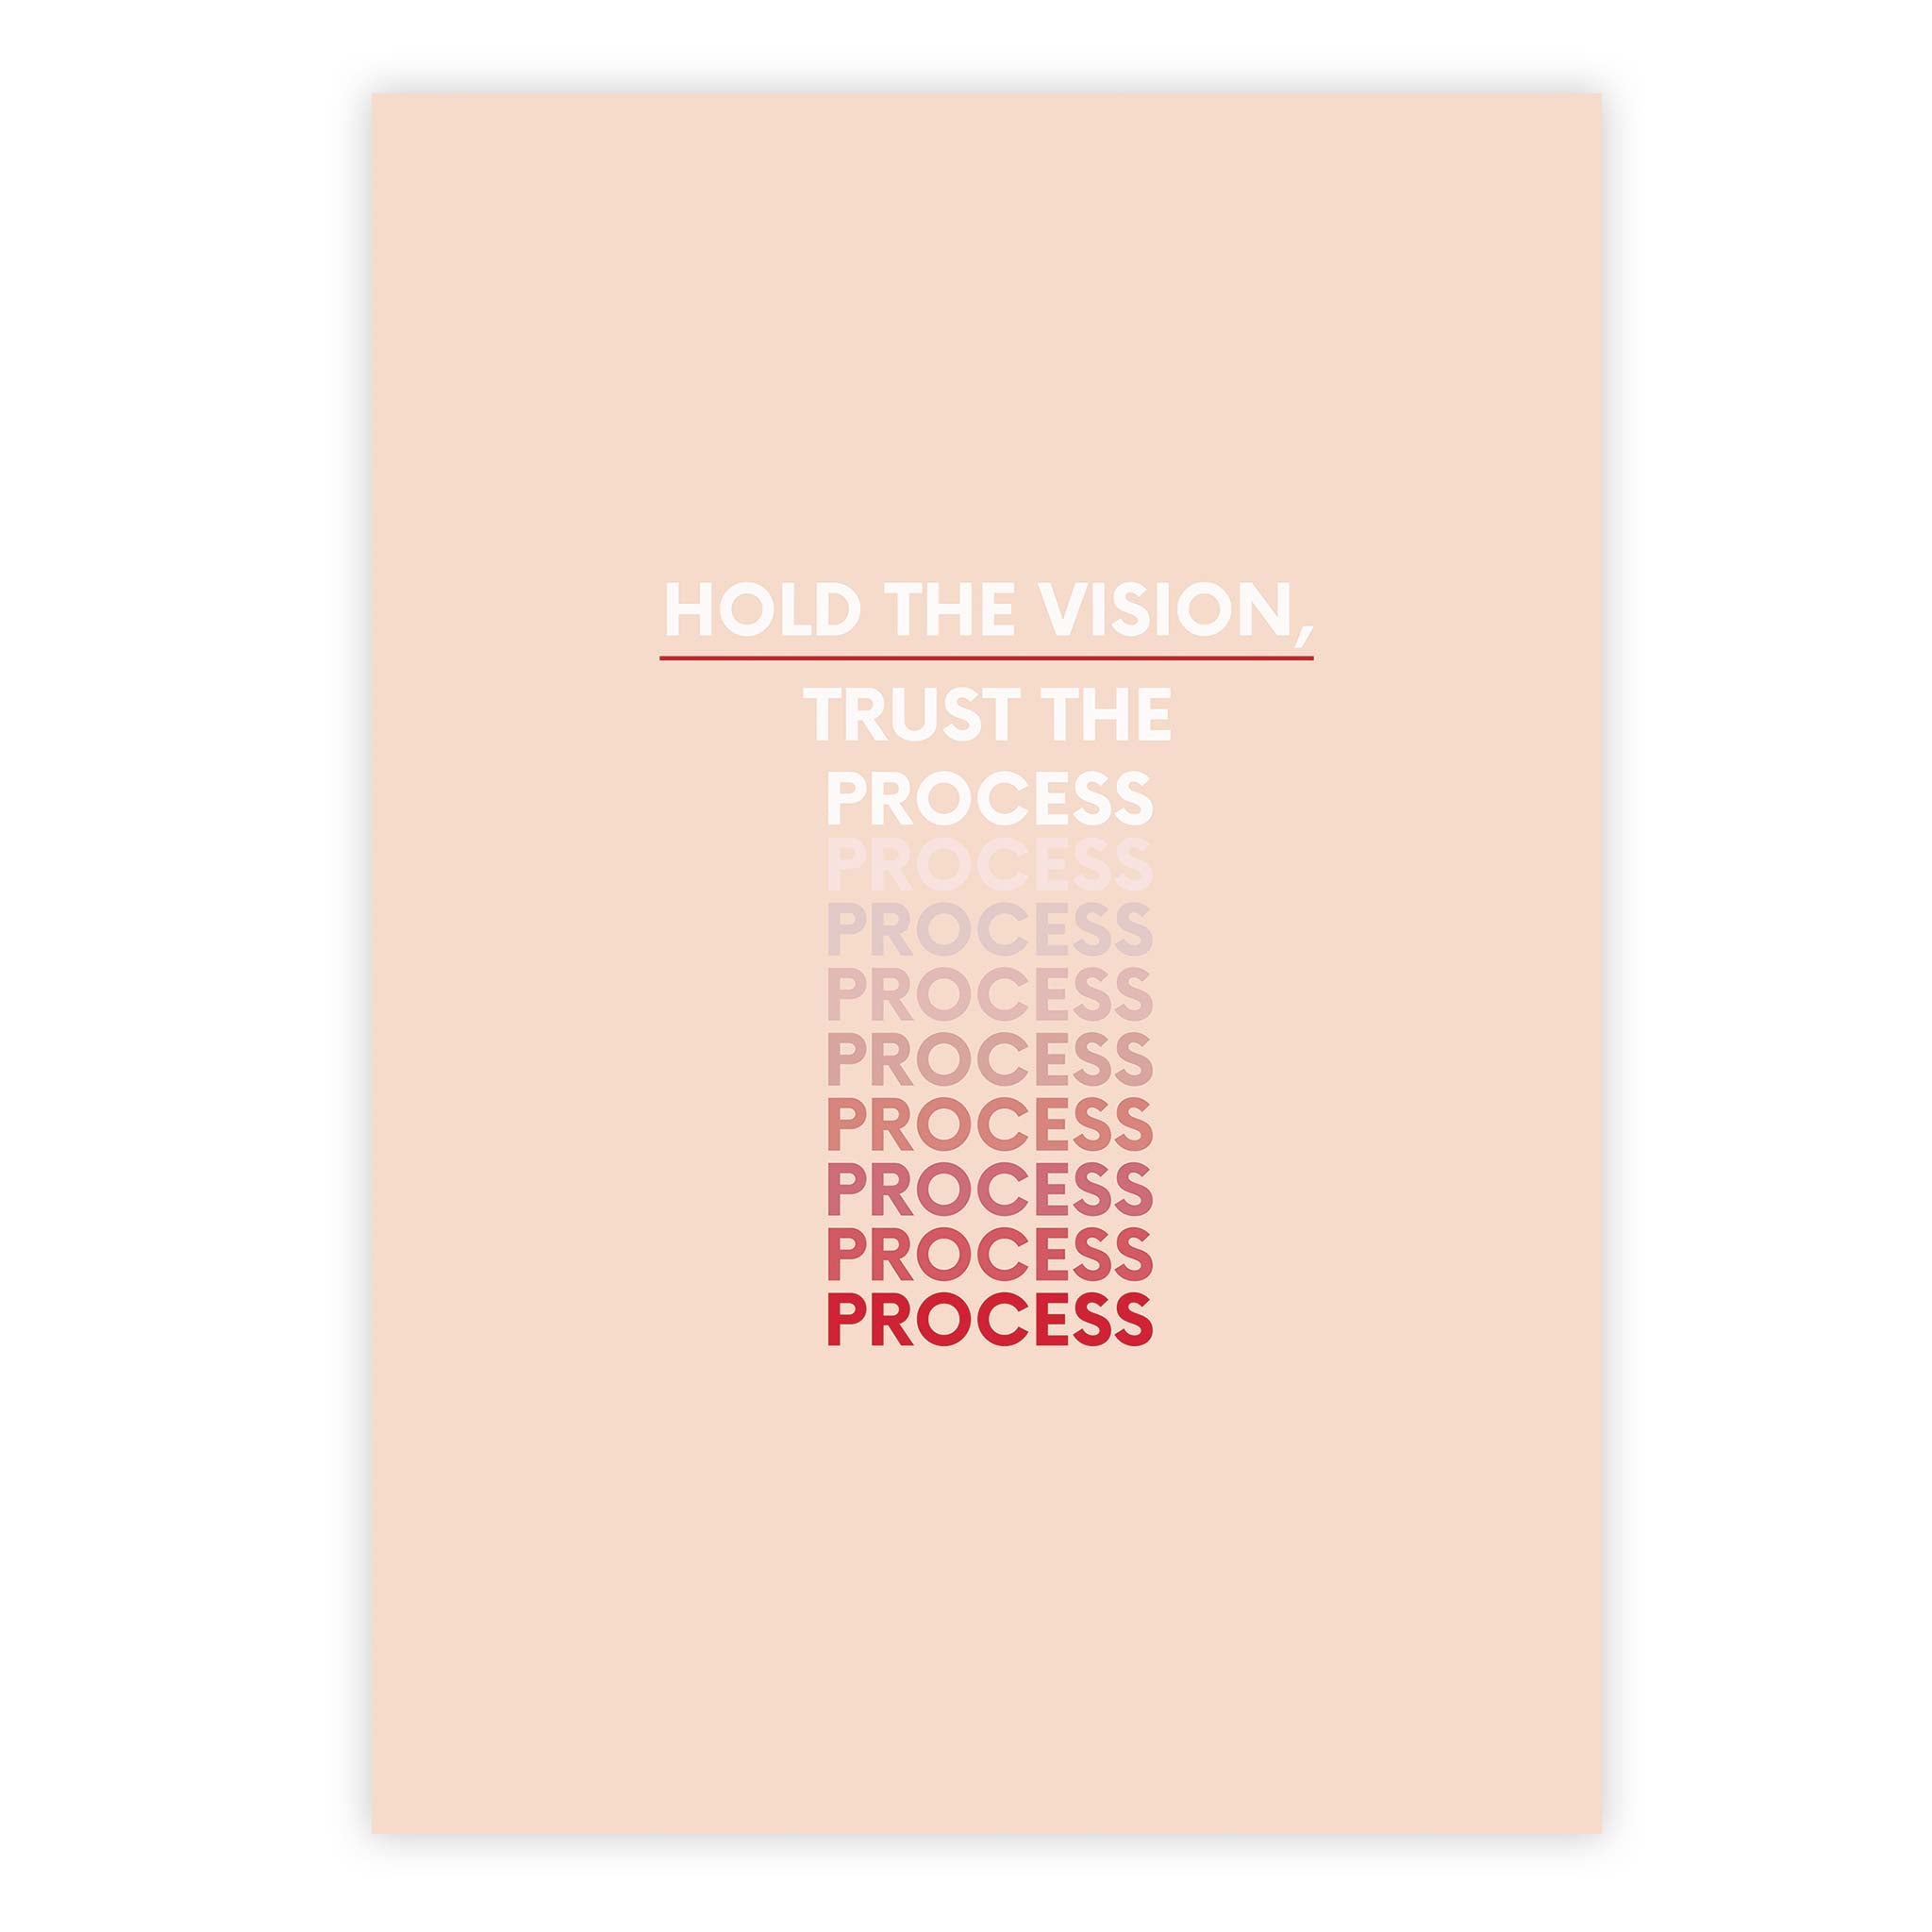 Hold the vision, trust the process